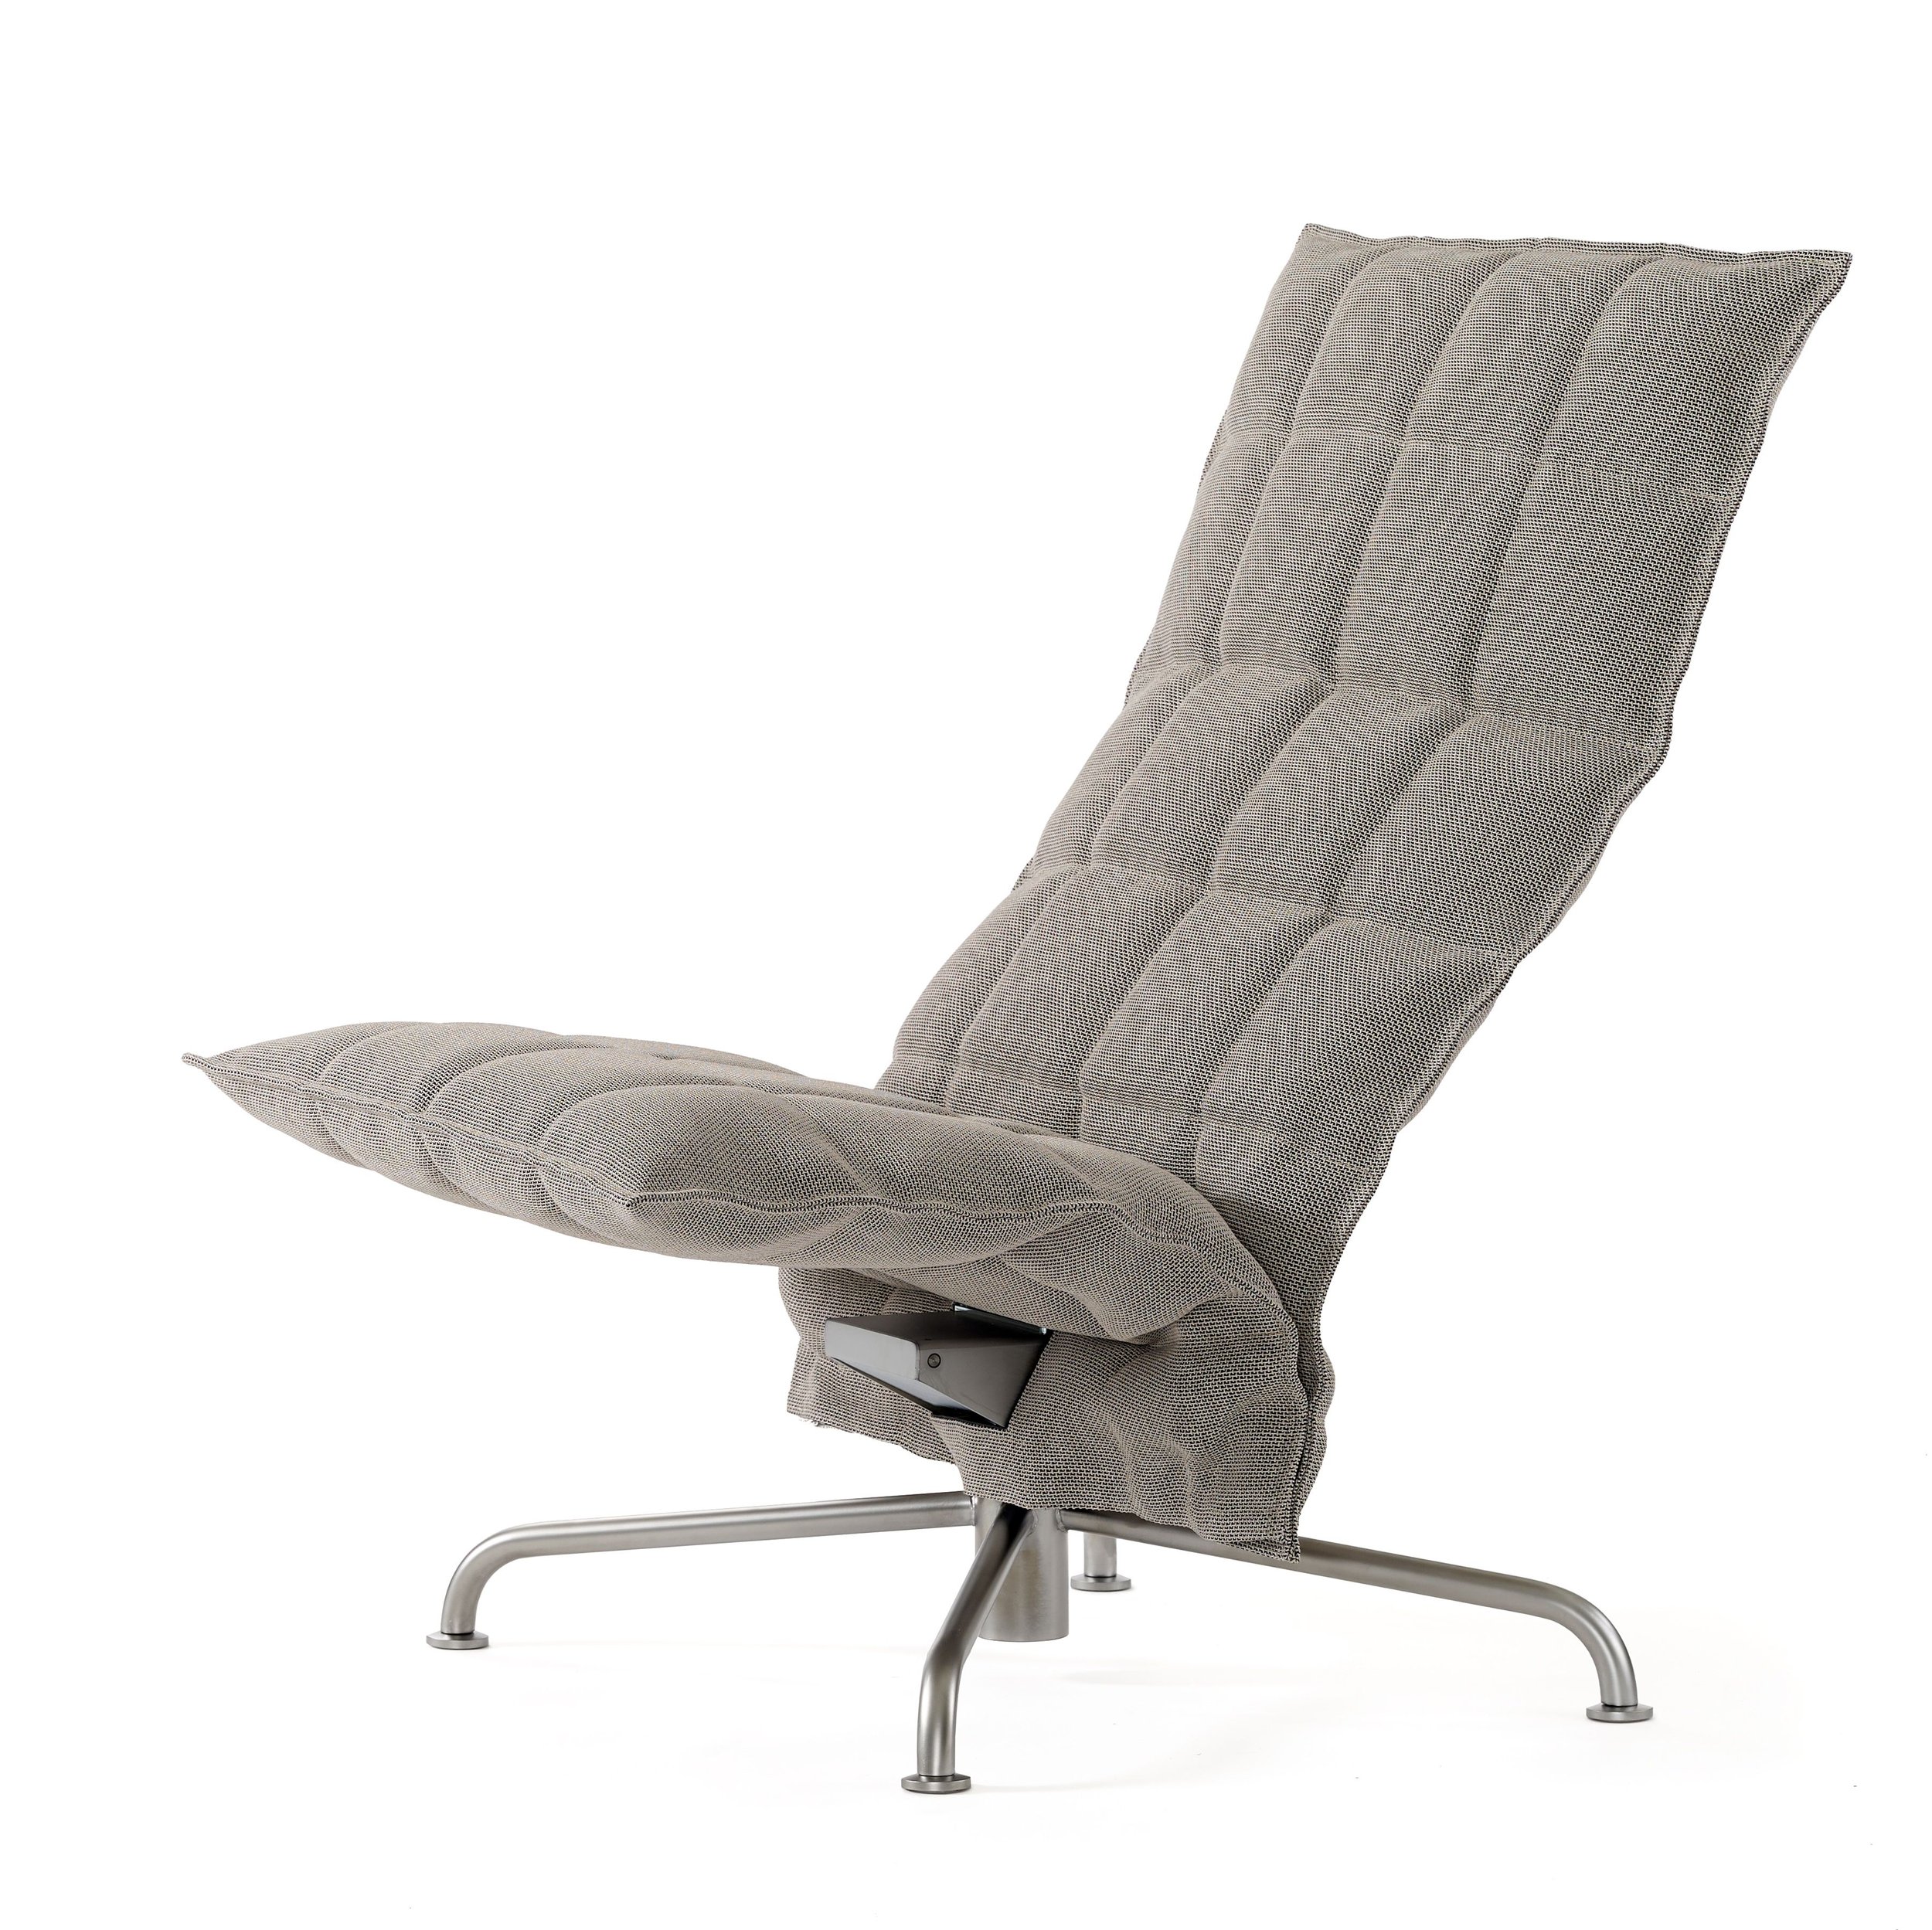 46027 Narrow swivel k Chair with star base, upholstered Sand stone-black.